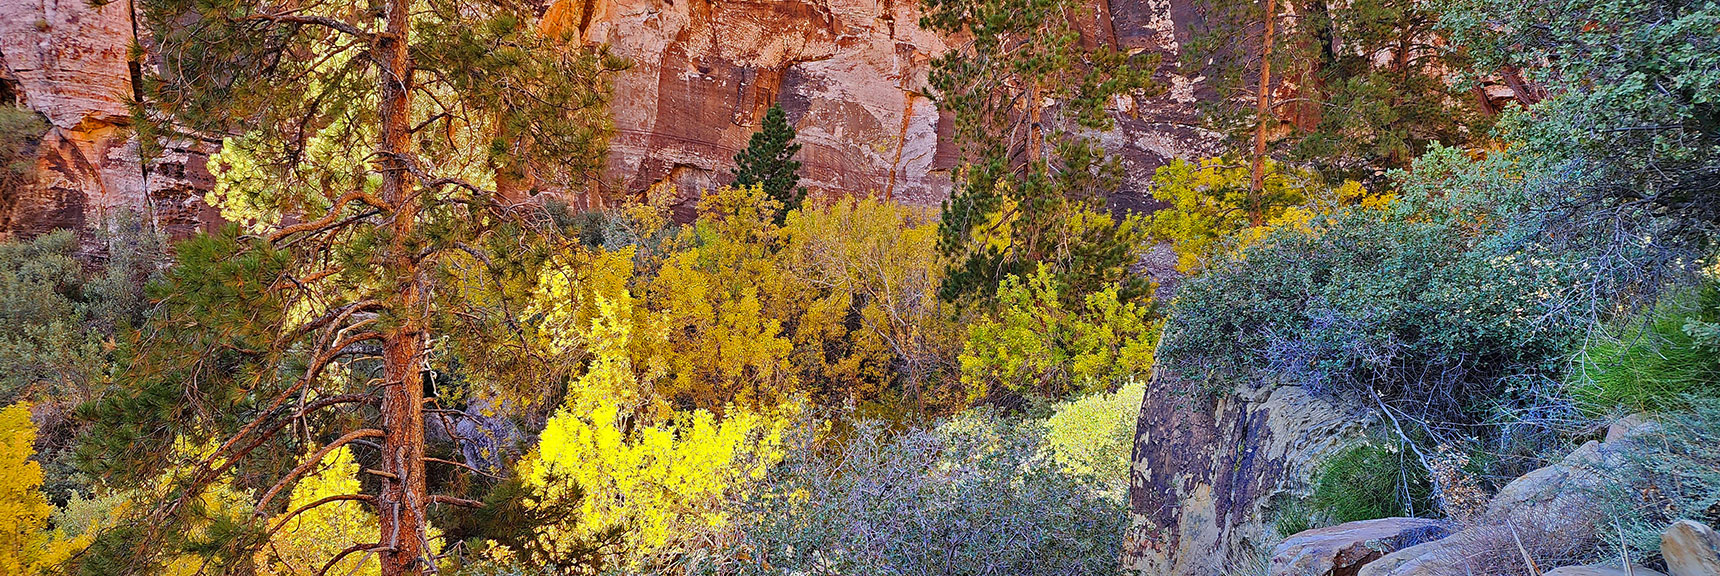 Mid-November Fall Colors in the Base of Pine Creek Canyon | Rock Climber Observations | Pine Creek Canyon | Rainbow Mountain Wilderness, Nevada